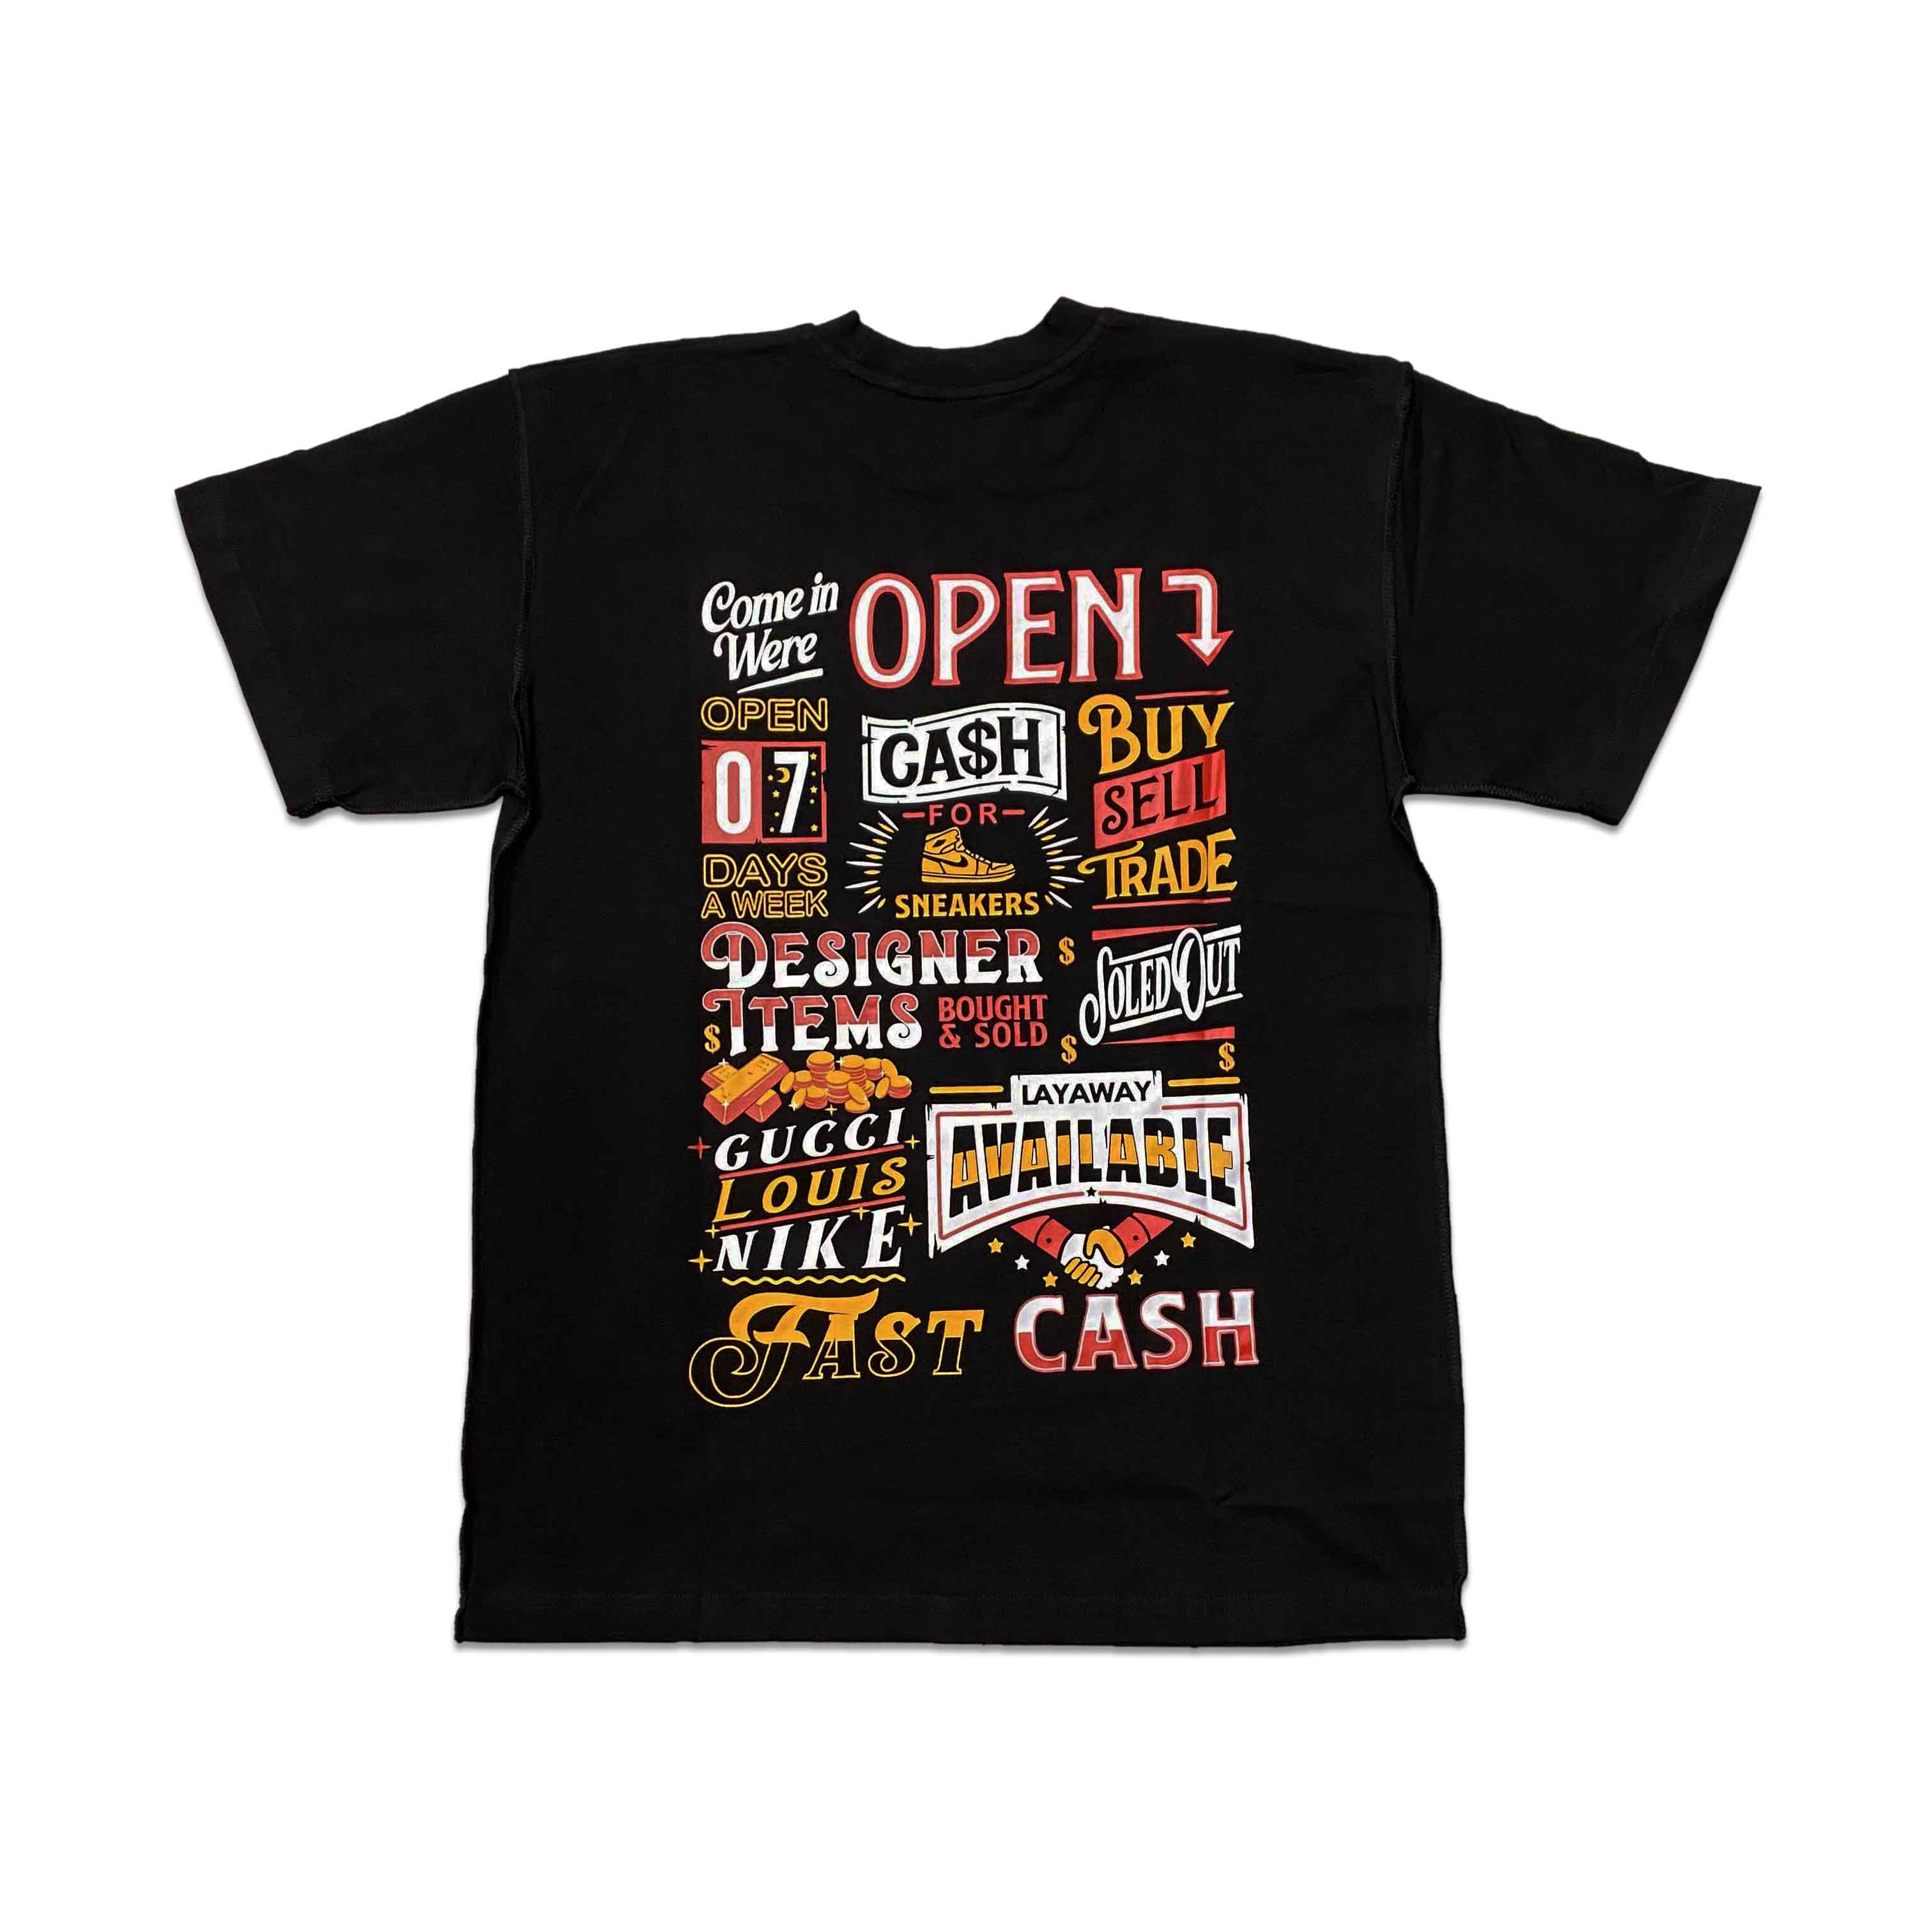 Soled Out T-Shirt "ADVERTISEMENT" Black New Size M